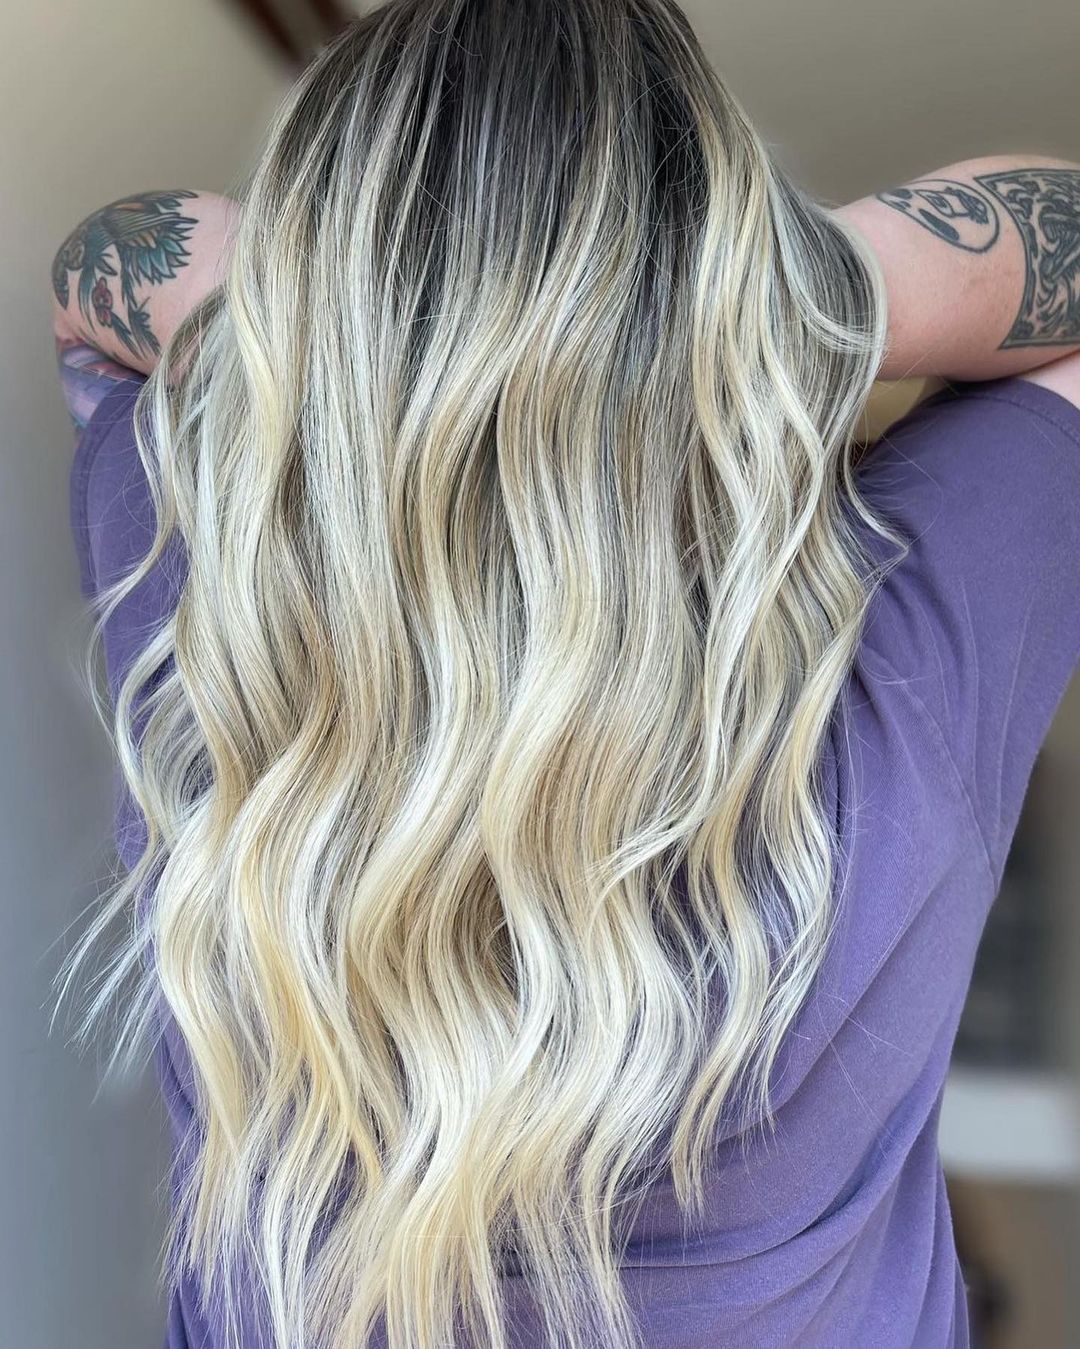 50 Awesome Long Layered Hair Ideas For 2021 images 27